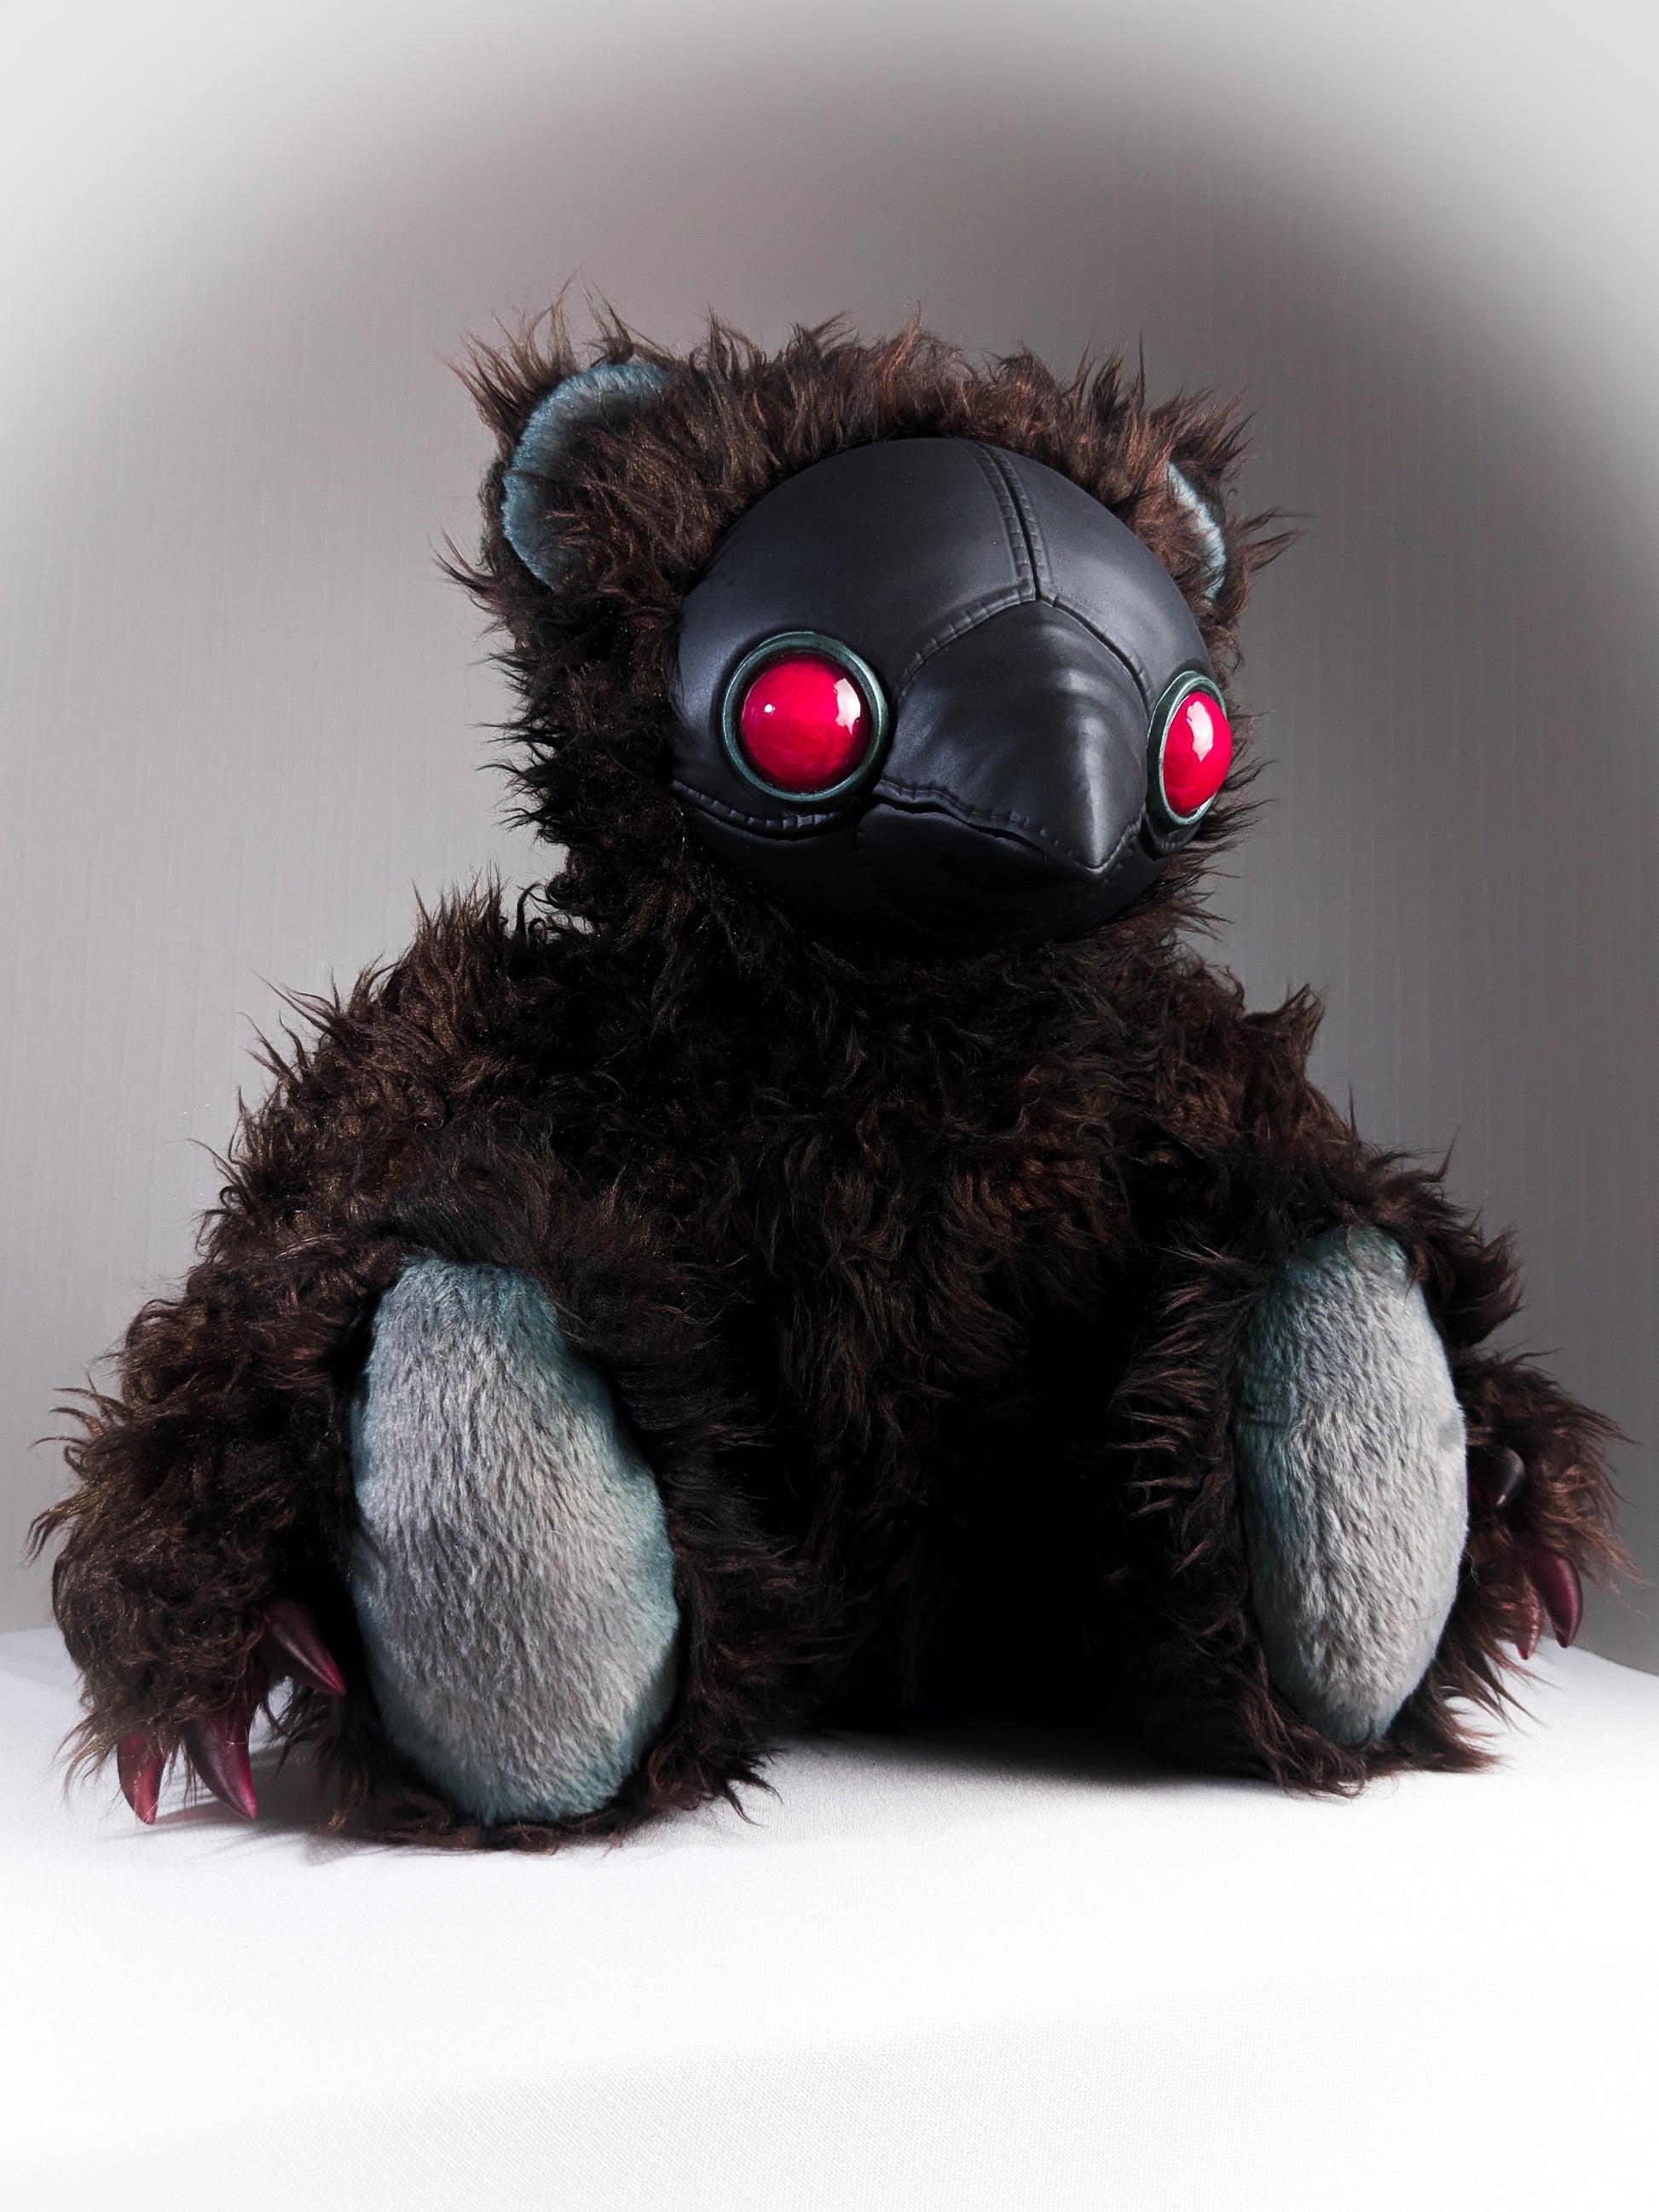 Curious Remedies: AMBROISE - CRYPTCRITZ Handcrafted Creepy Cute Plague Doctor Art Doll Plush Toy for Eccentric Souls